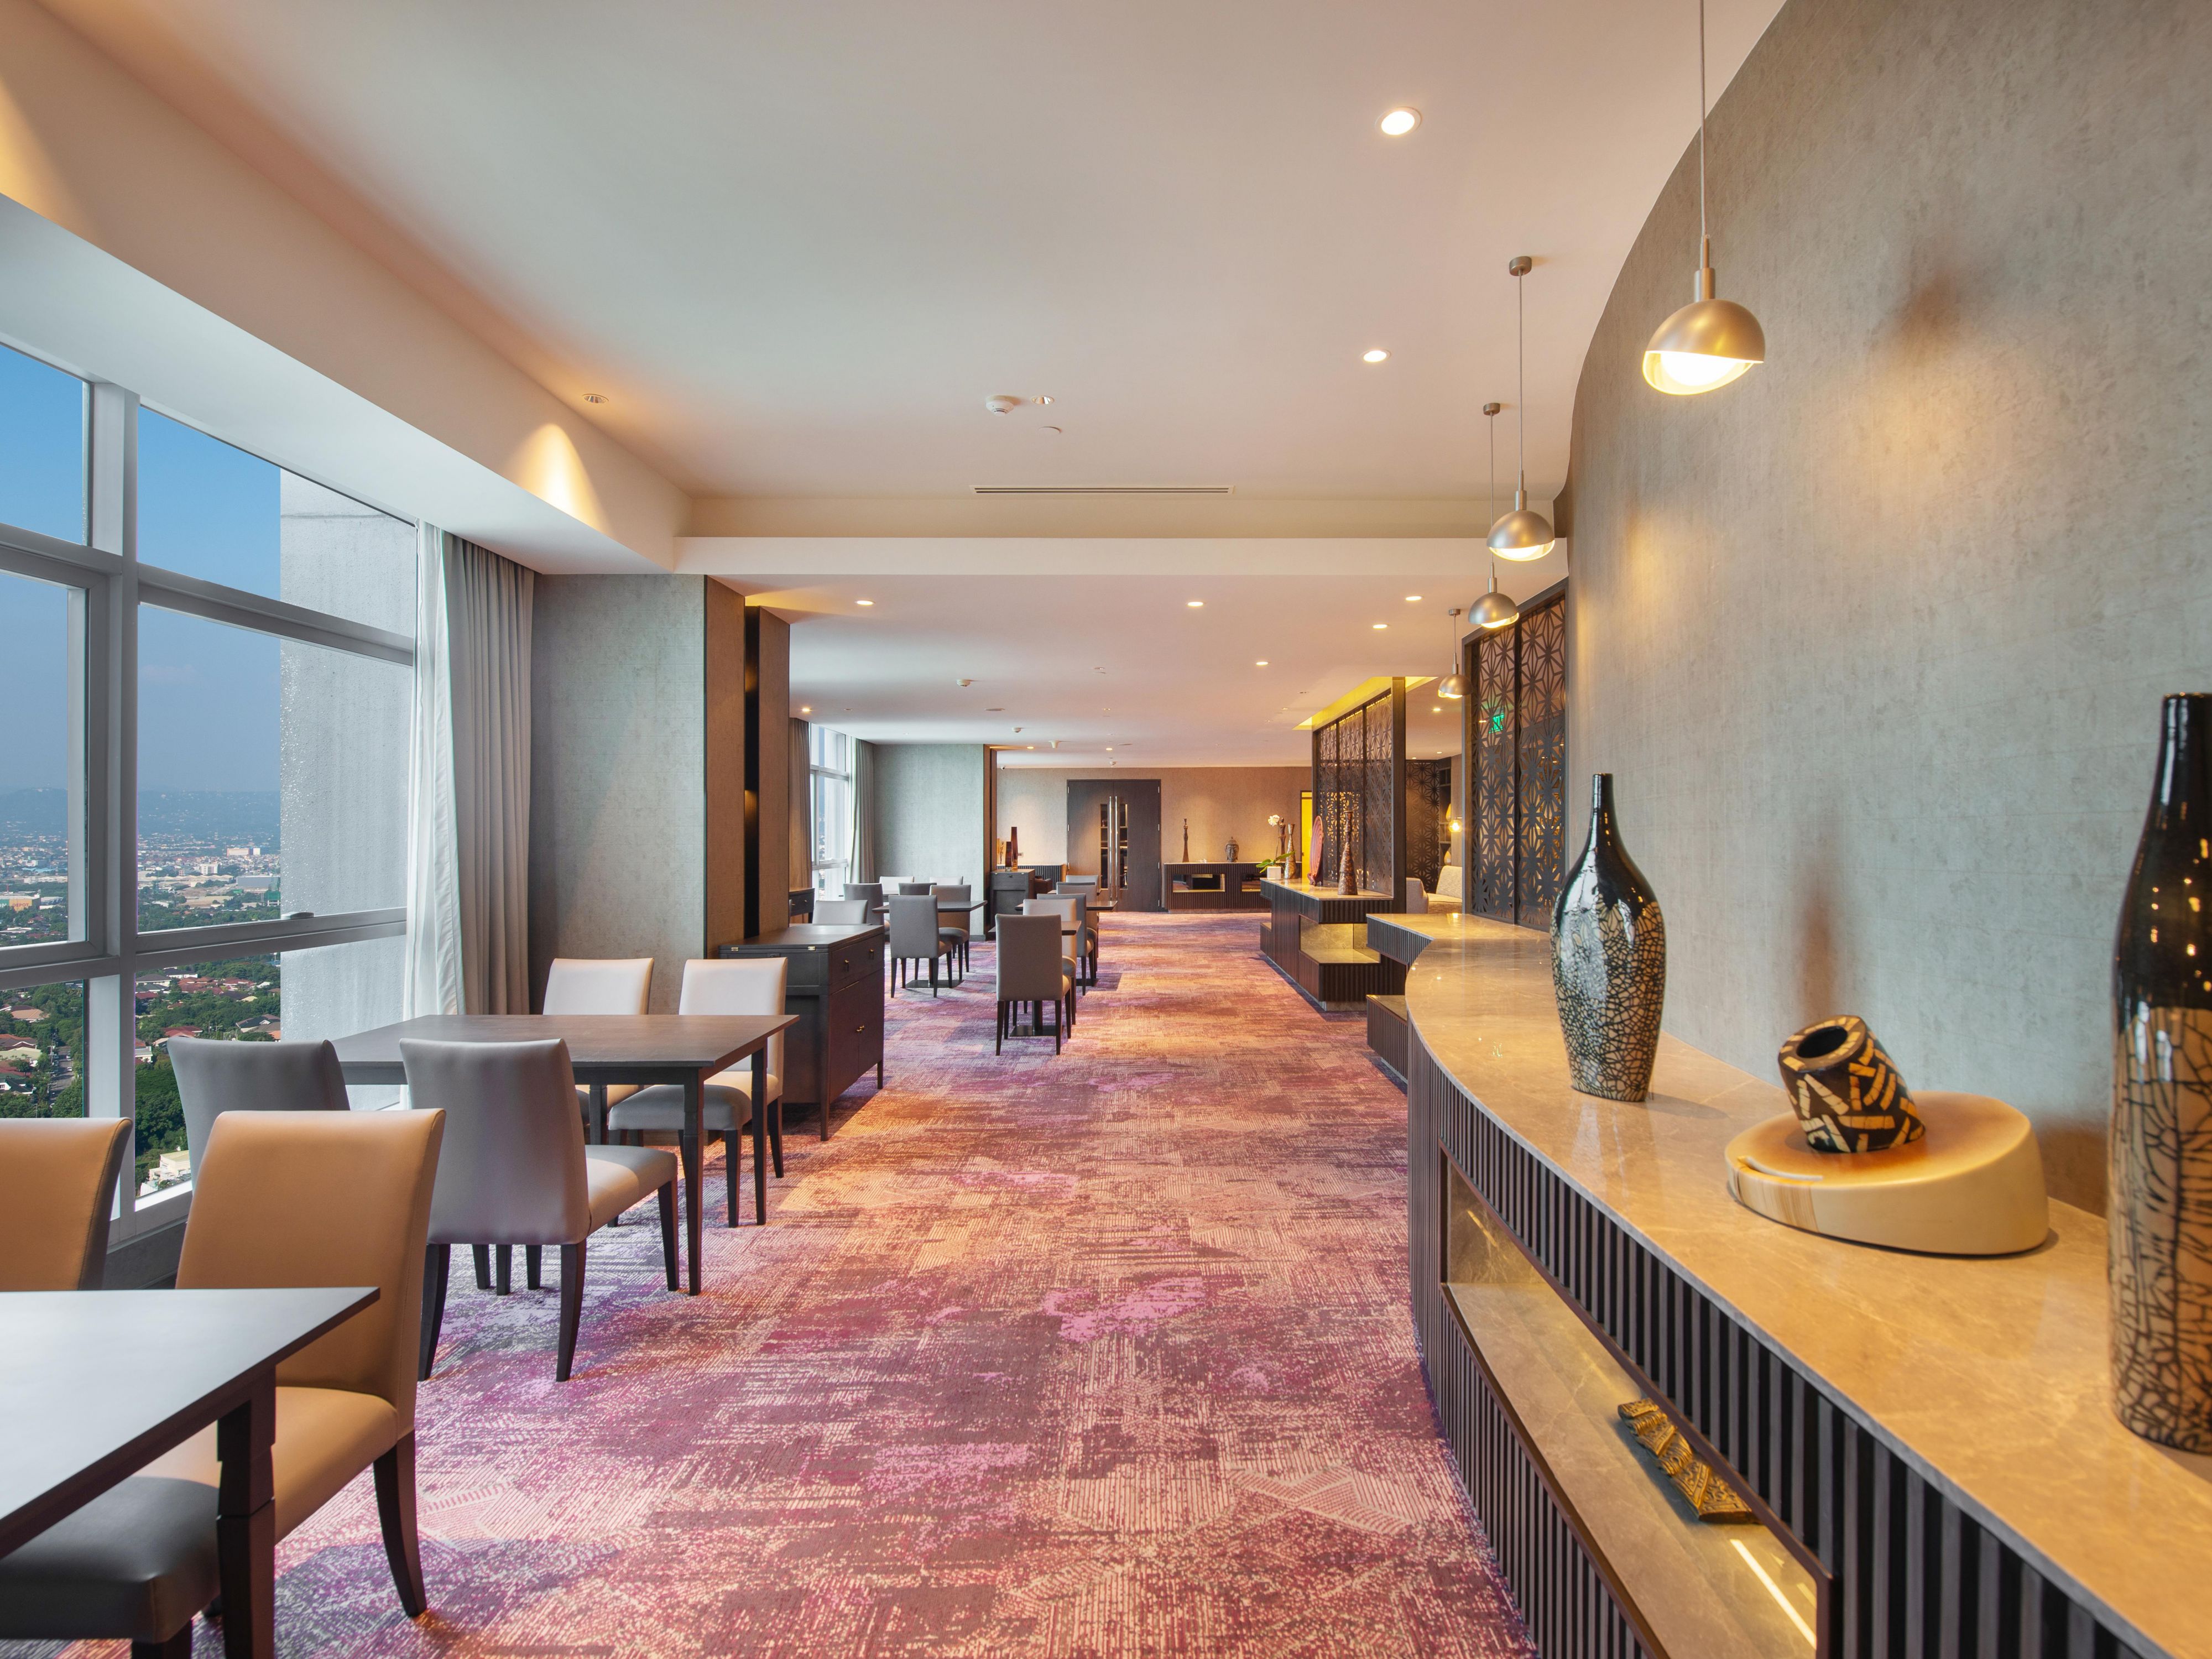 The Club Lounge is well-designed, with a perfect blend of business and leisure in mind. Regain your focus with our intimate meeting spaces, a fully equipped boardroom, complimentary breakfast, afternoon tea & snacks and evening cocktails with stunning panoramic views of the city.
